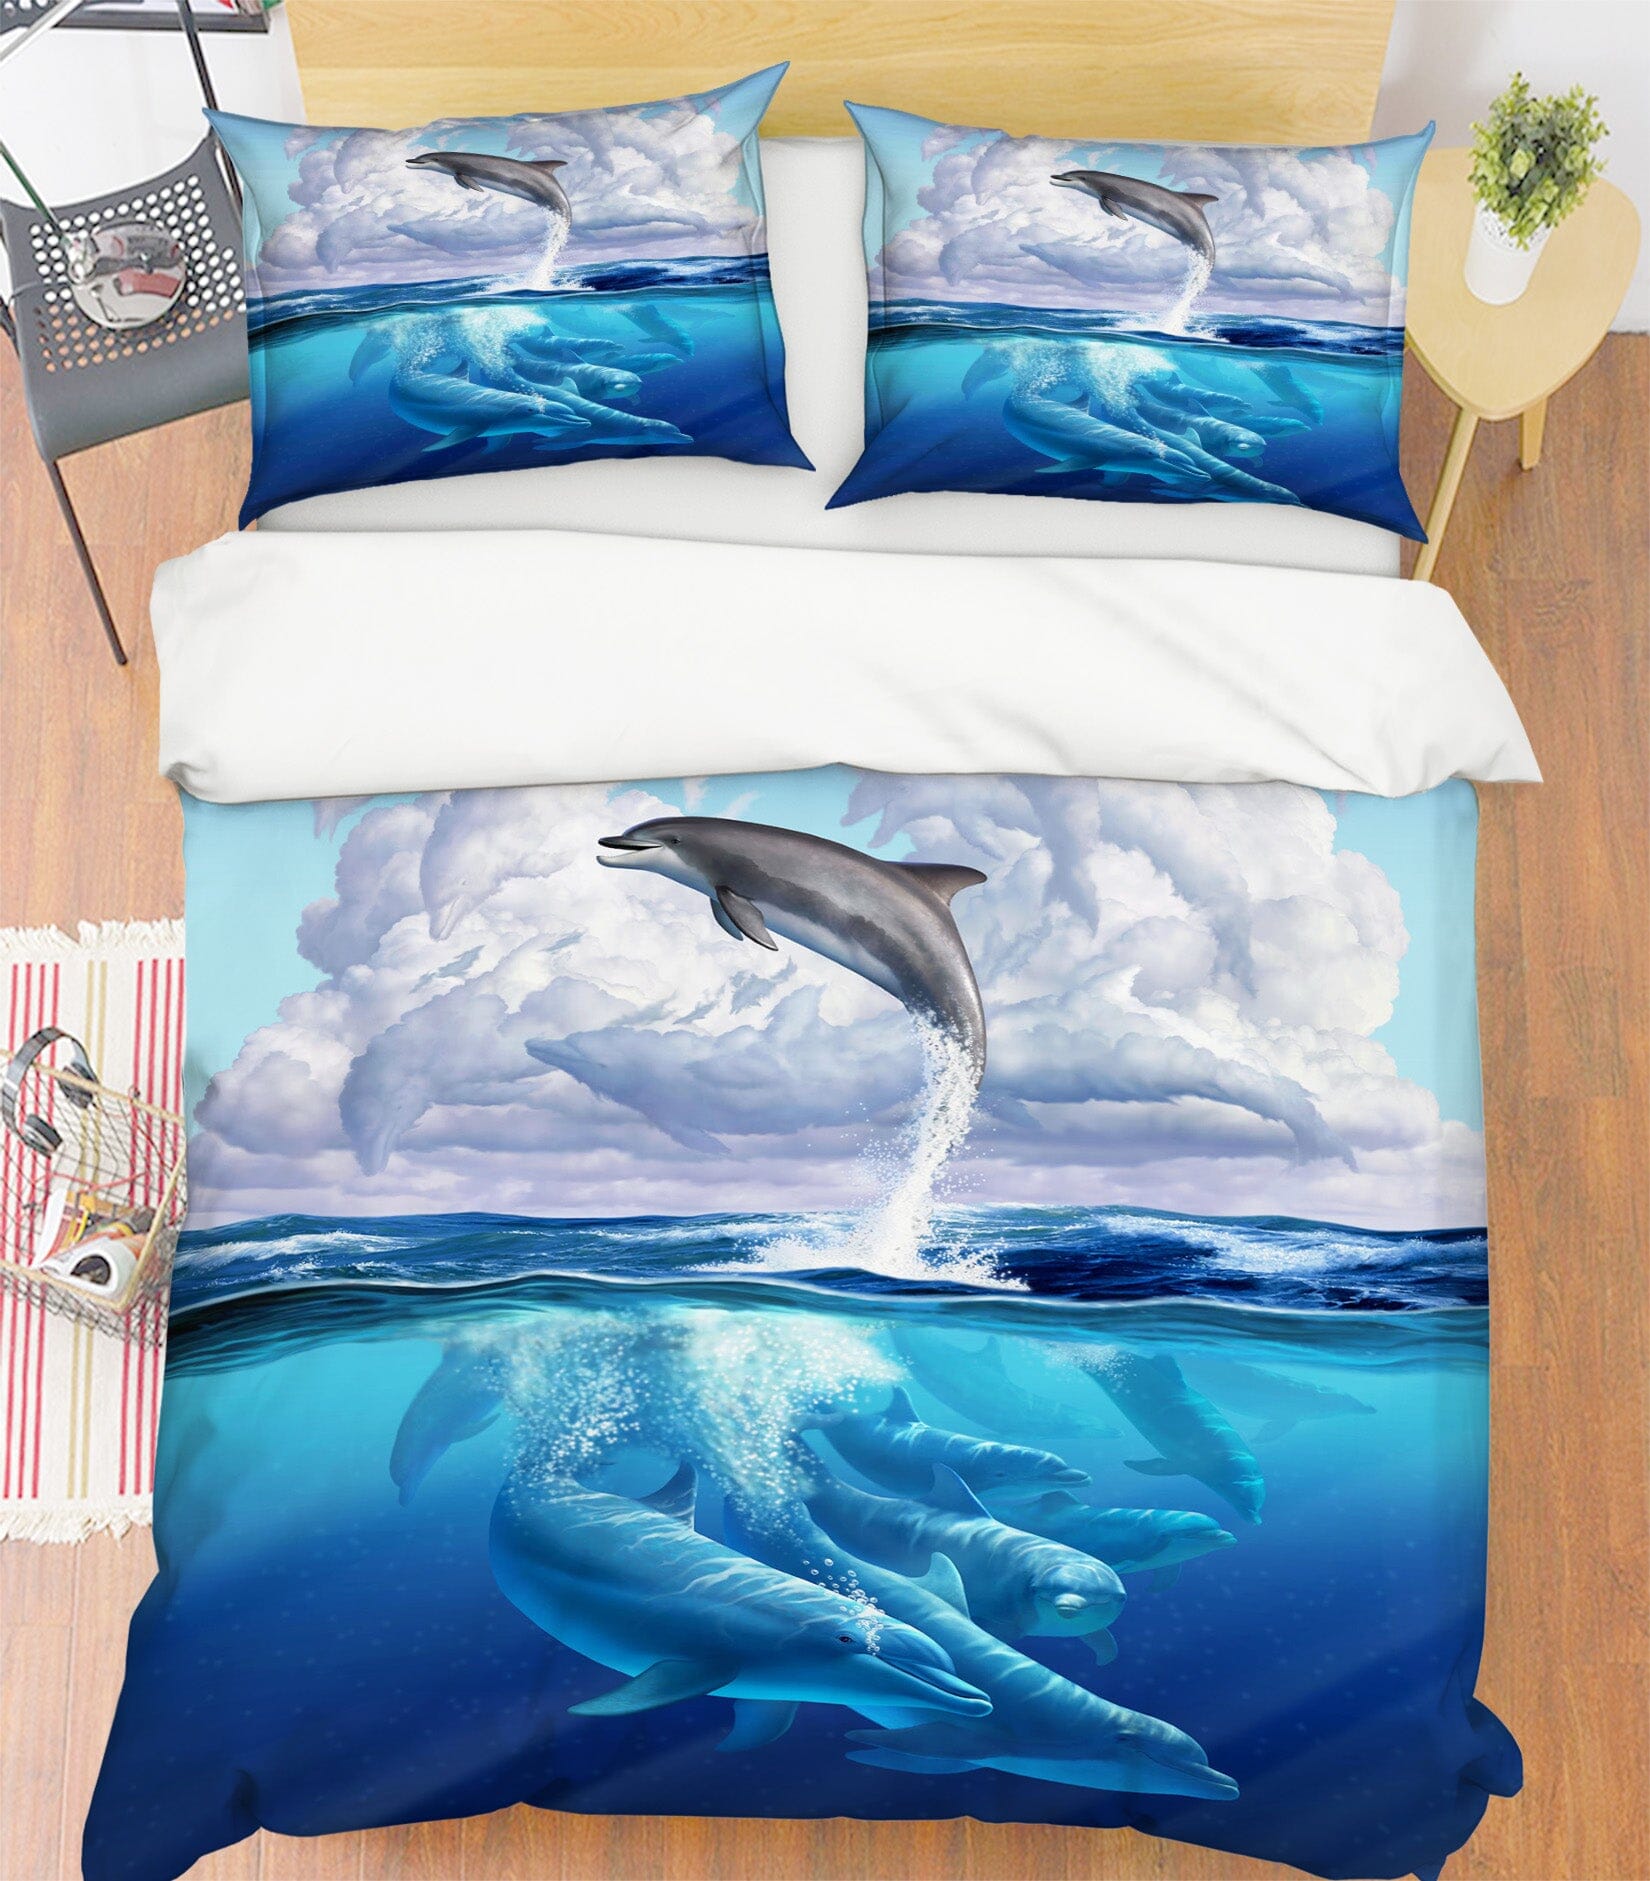 3D Dolphonic Symphony 2105 Jerry LoFaro bedding Bed Pillowcases Quilt Quiet Covers AJ Creativity Home 